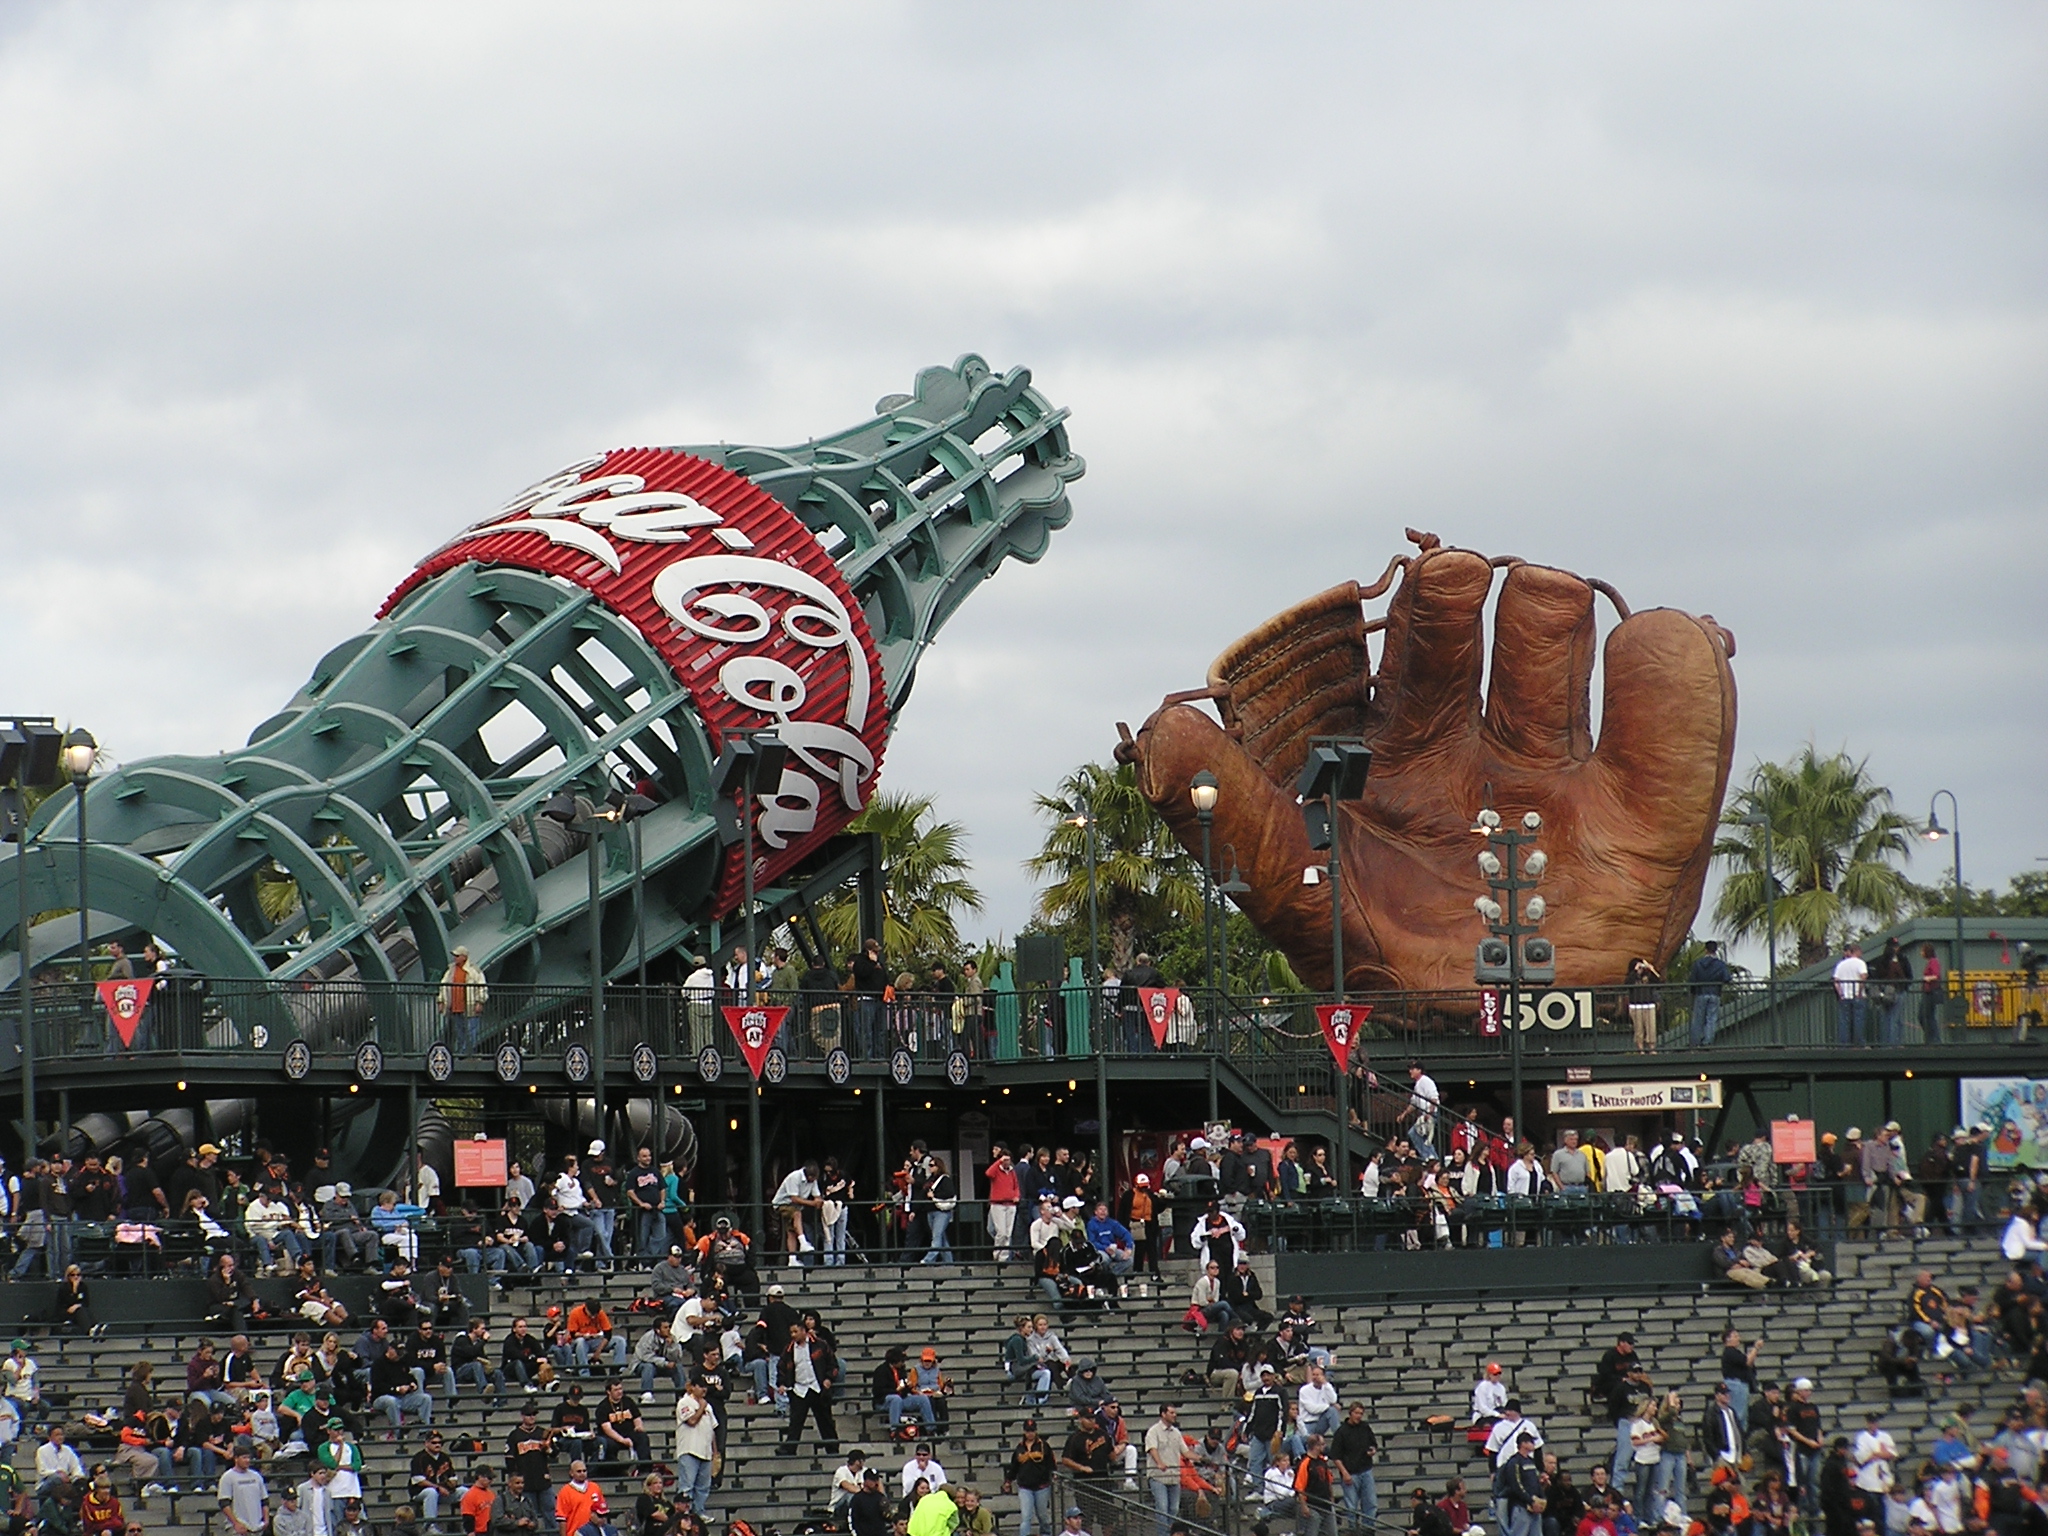 The Coke Bottle slide and Glove - AT&T Park